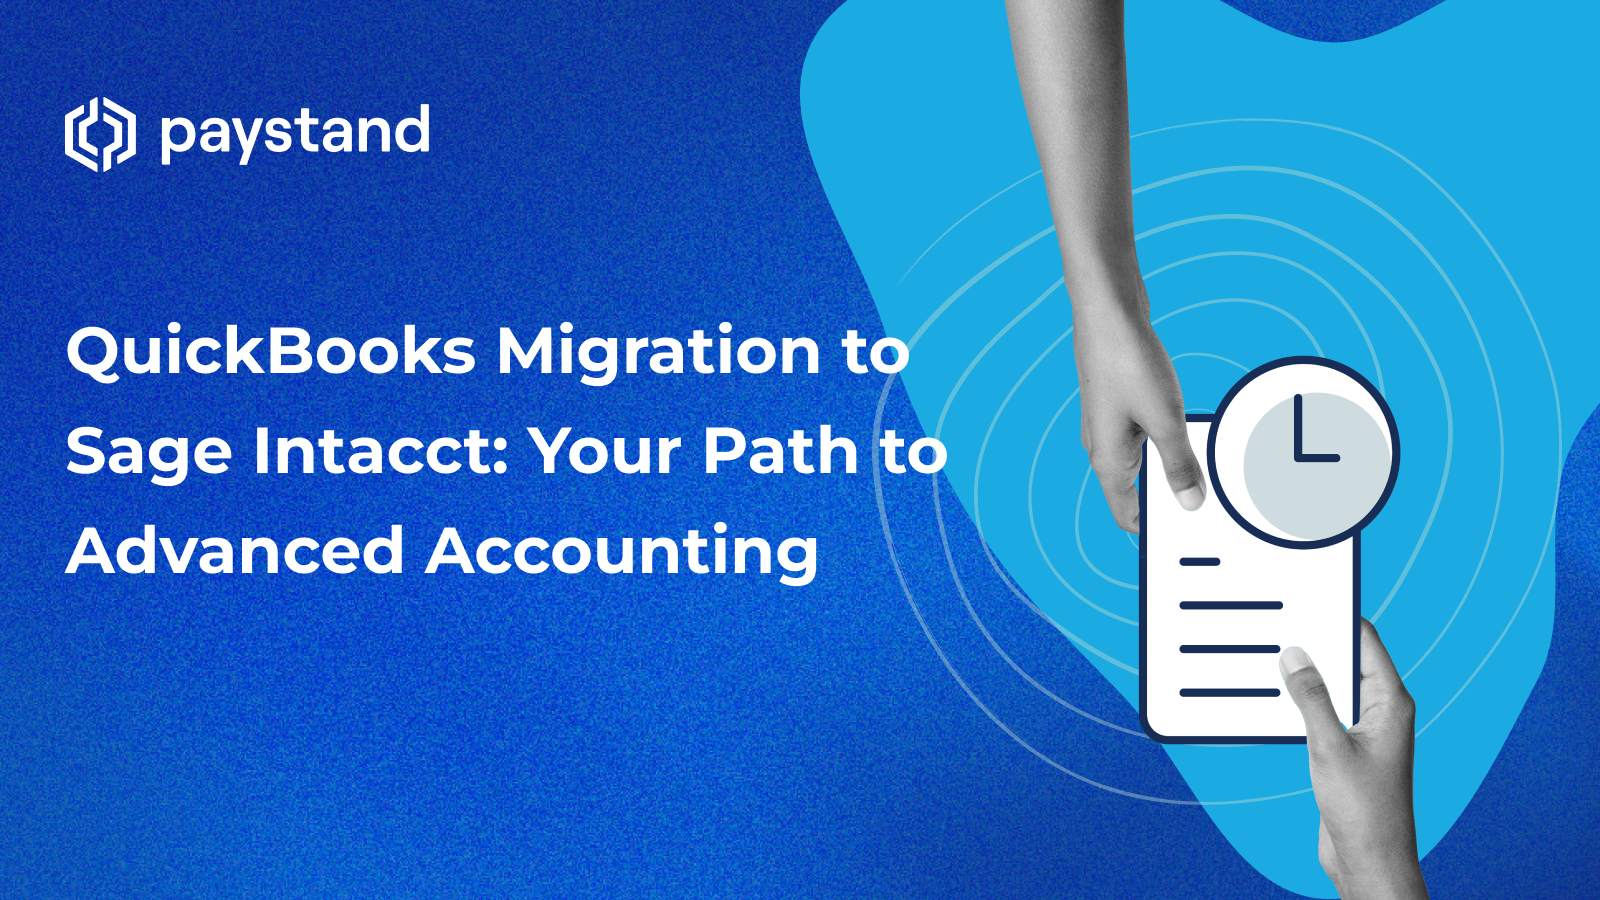 QuickBooks Migration to Sage Intacct: Your Path to Advanced Accounting